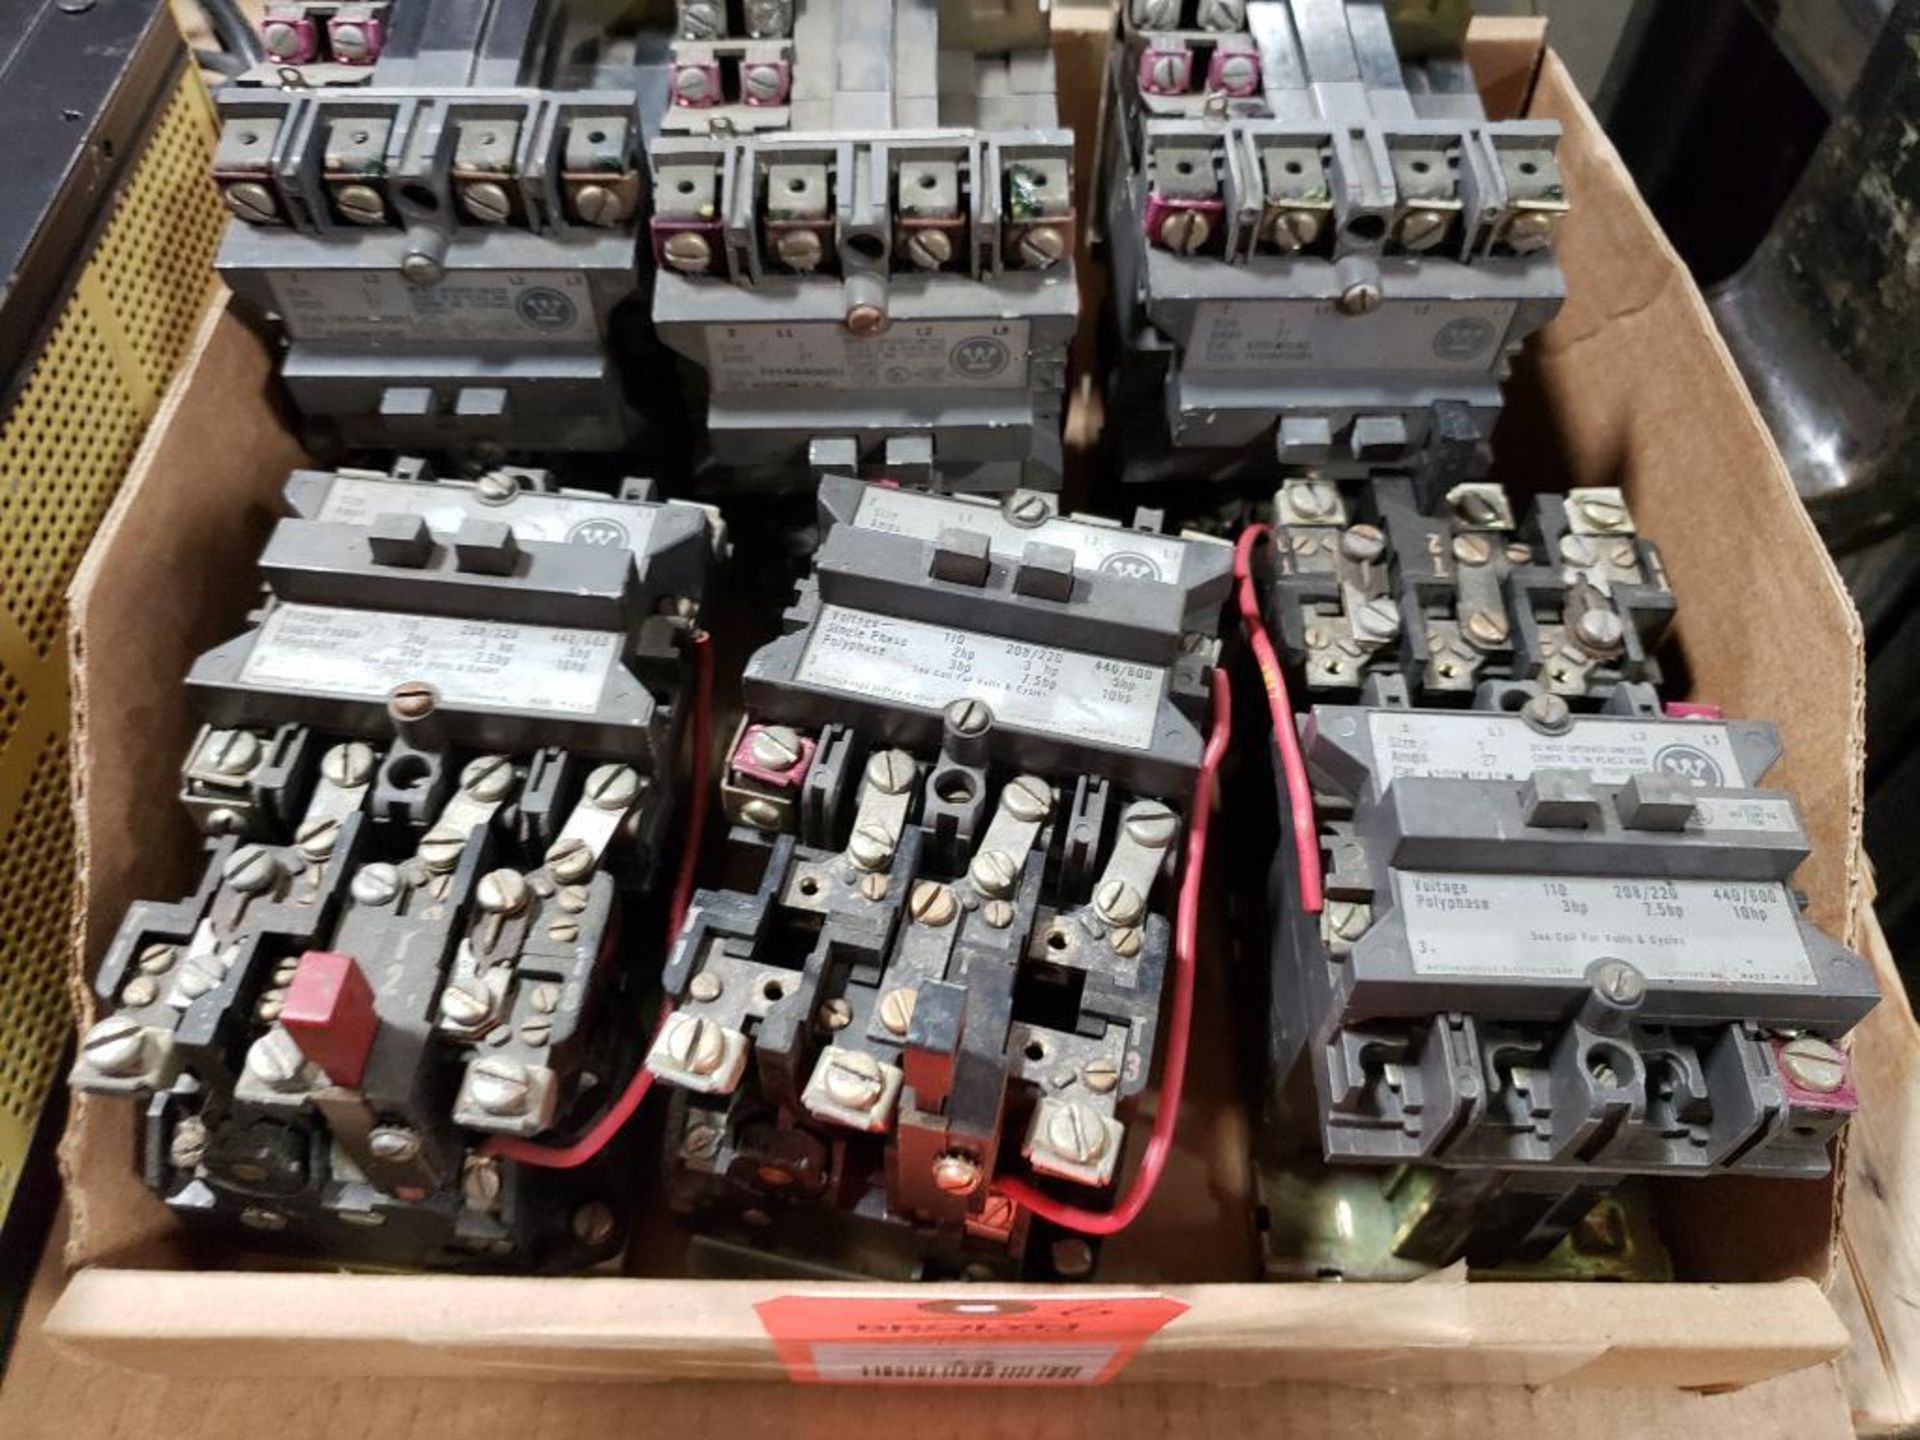 Qty 6 - Westinghouse starter contactors. A200M1CAC 27AMP. - Image 9 of 9